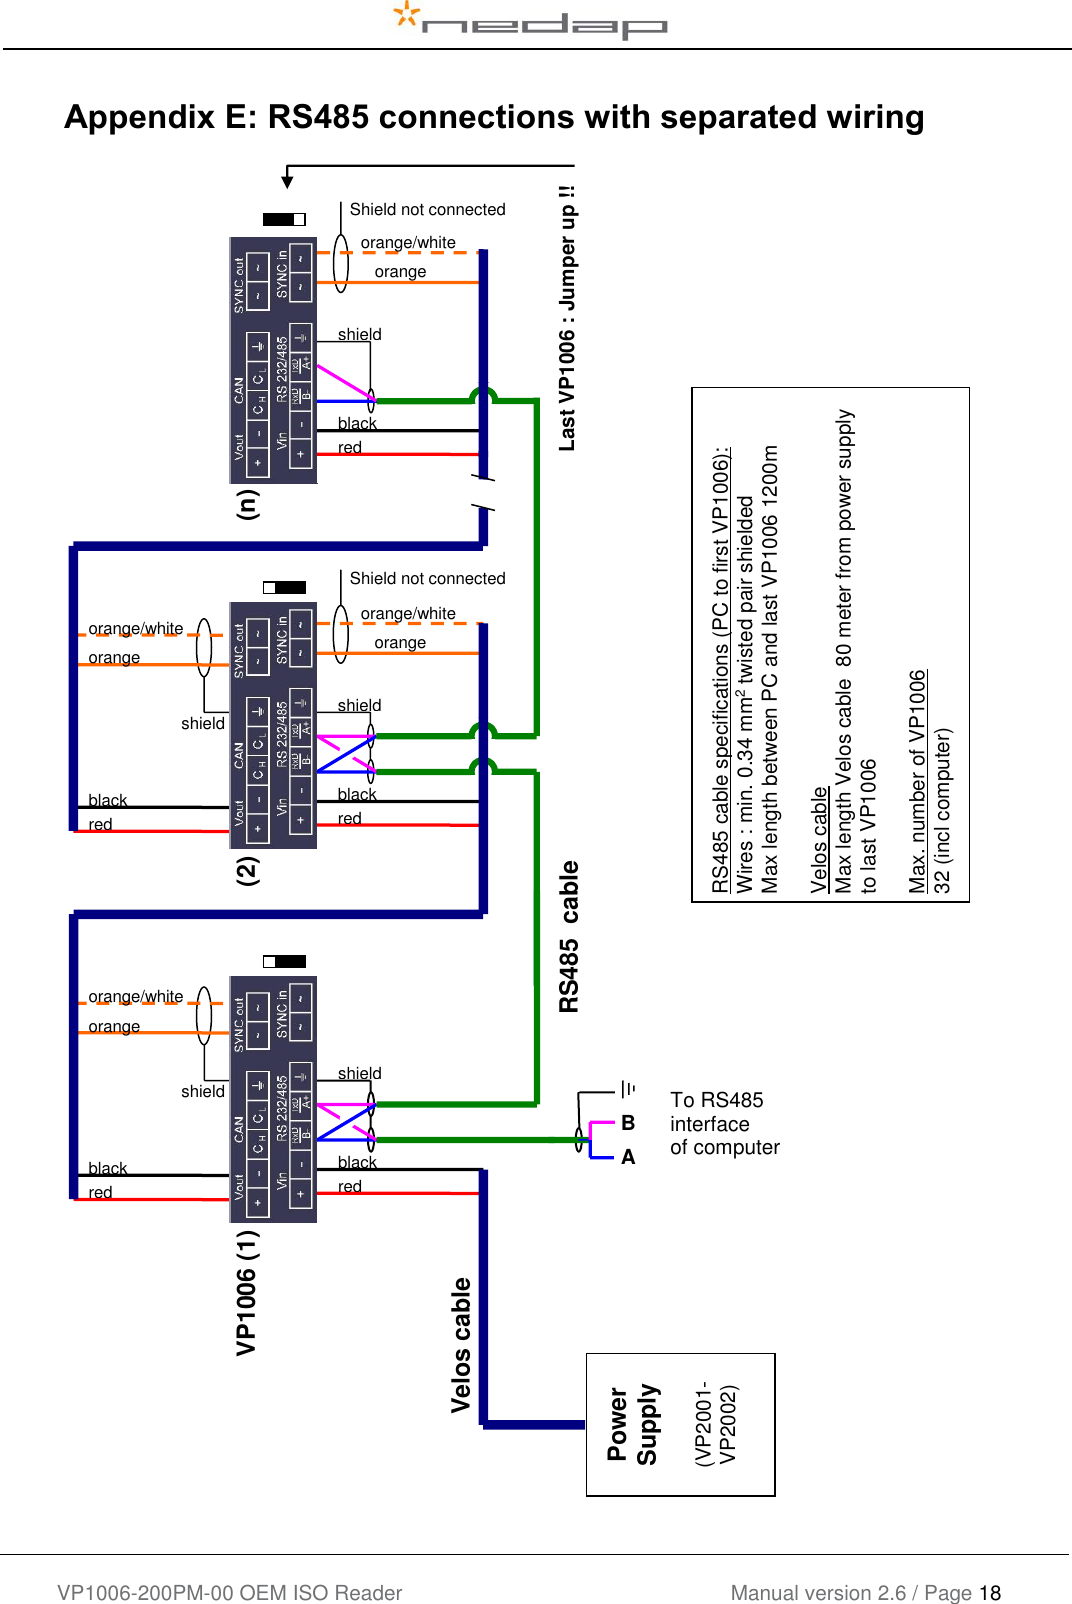    VP1006-200PM-00 OEM ISO Reader Manual version 2.6 / Page 18   Appendix E: RS485 connections with separated wiring   VP1006 (1)  RS485  cable A B (2)  (n)   red black orange orange/white shield red black orange orange/white shield red black orange orange/white shield red black shield red black orange orange/white shield To RS485  interface of computer Last VP1006 : Jumper up !! RS485 cable specifications (PC to first VP1006): Wires : min. 0.34 mm2 twisted pair shielded Max length between PC and last VP1006 1200m  Velos cable Max length Velos cable  80 meter from power supply to last VP1006  Max. number of VP1006 32 (incl computer) Velos cable Power Supply  (VP2001- VP2002) Shield not connected Shield not connected 